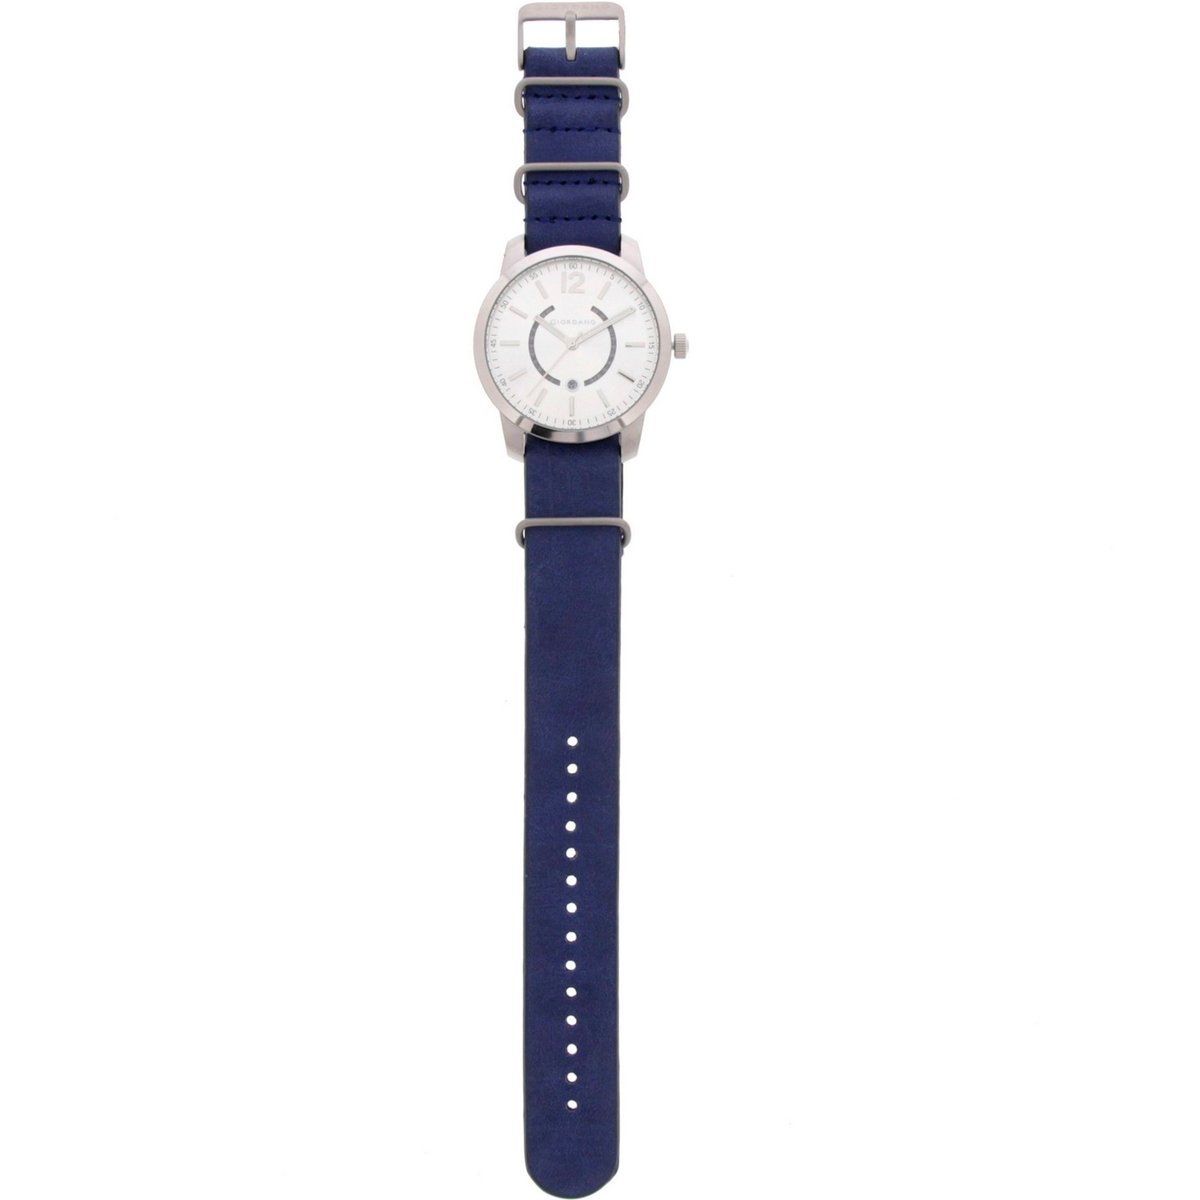 Giordano Men's Analog Watch Blue Strap With White Dial 1791-02